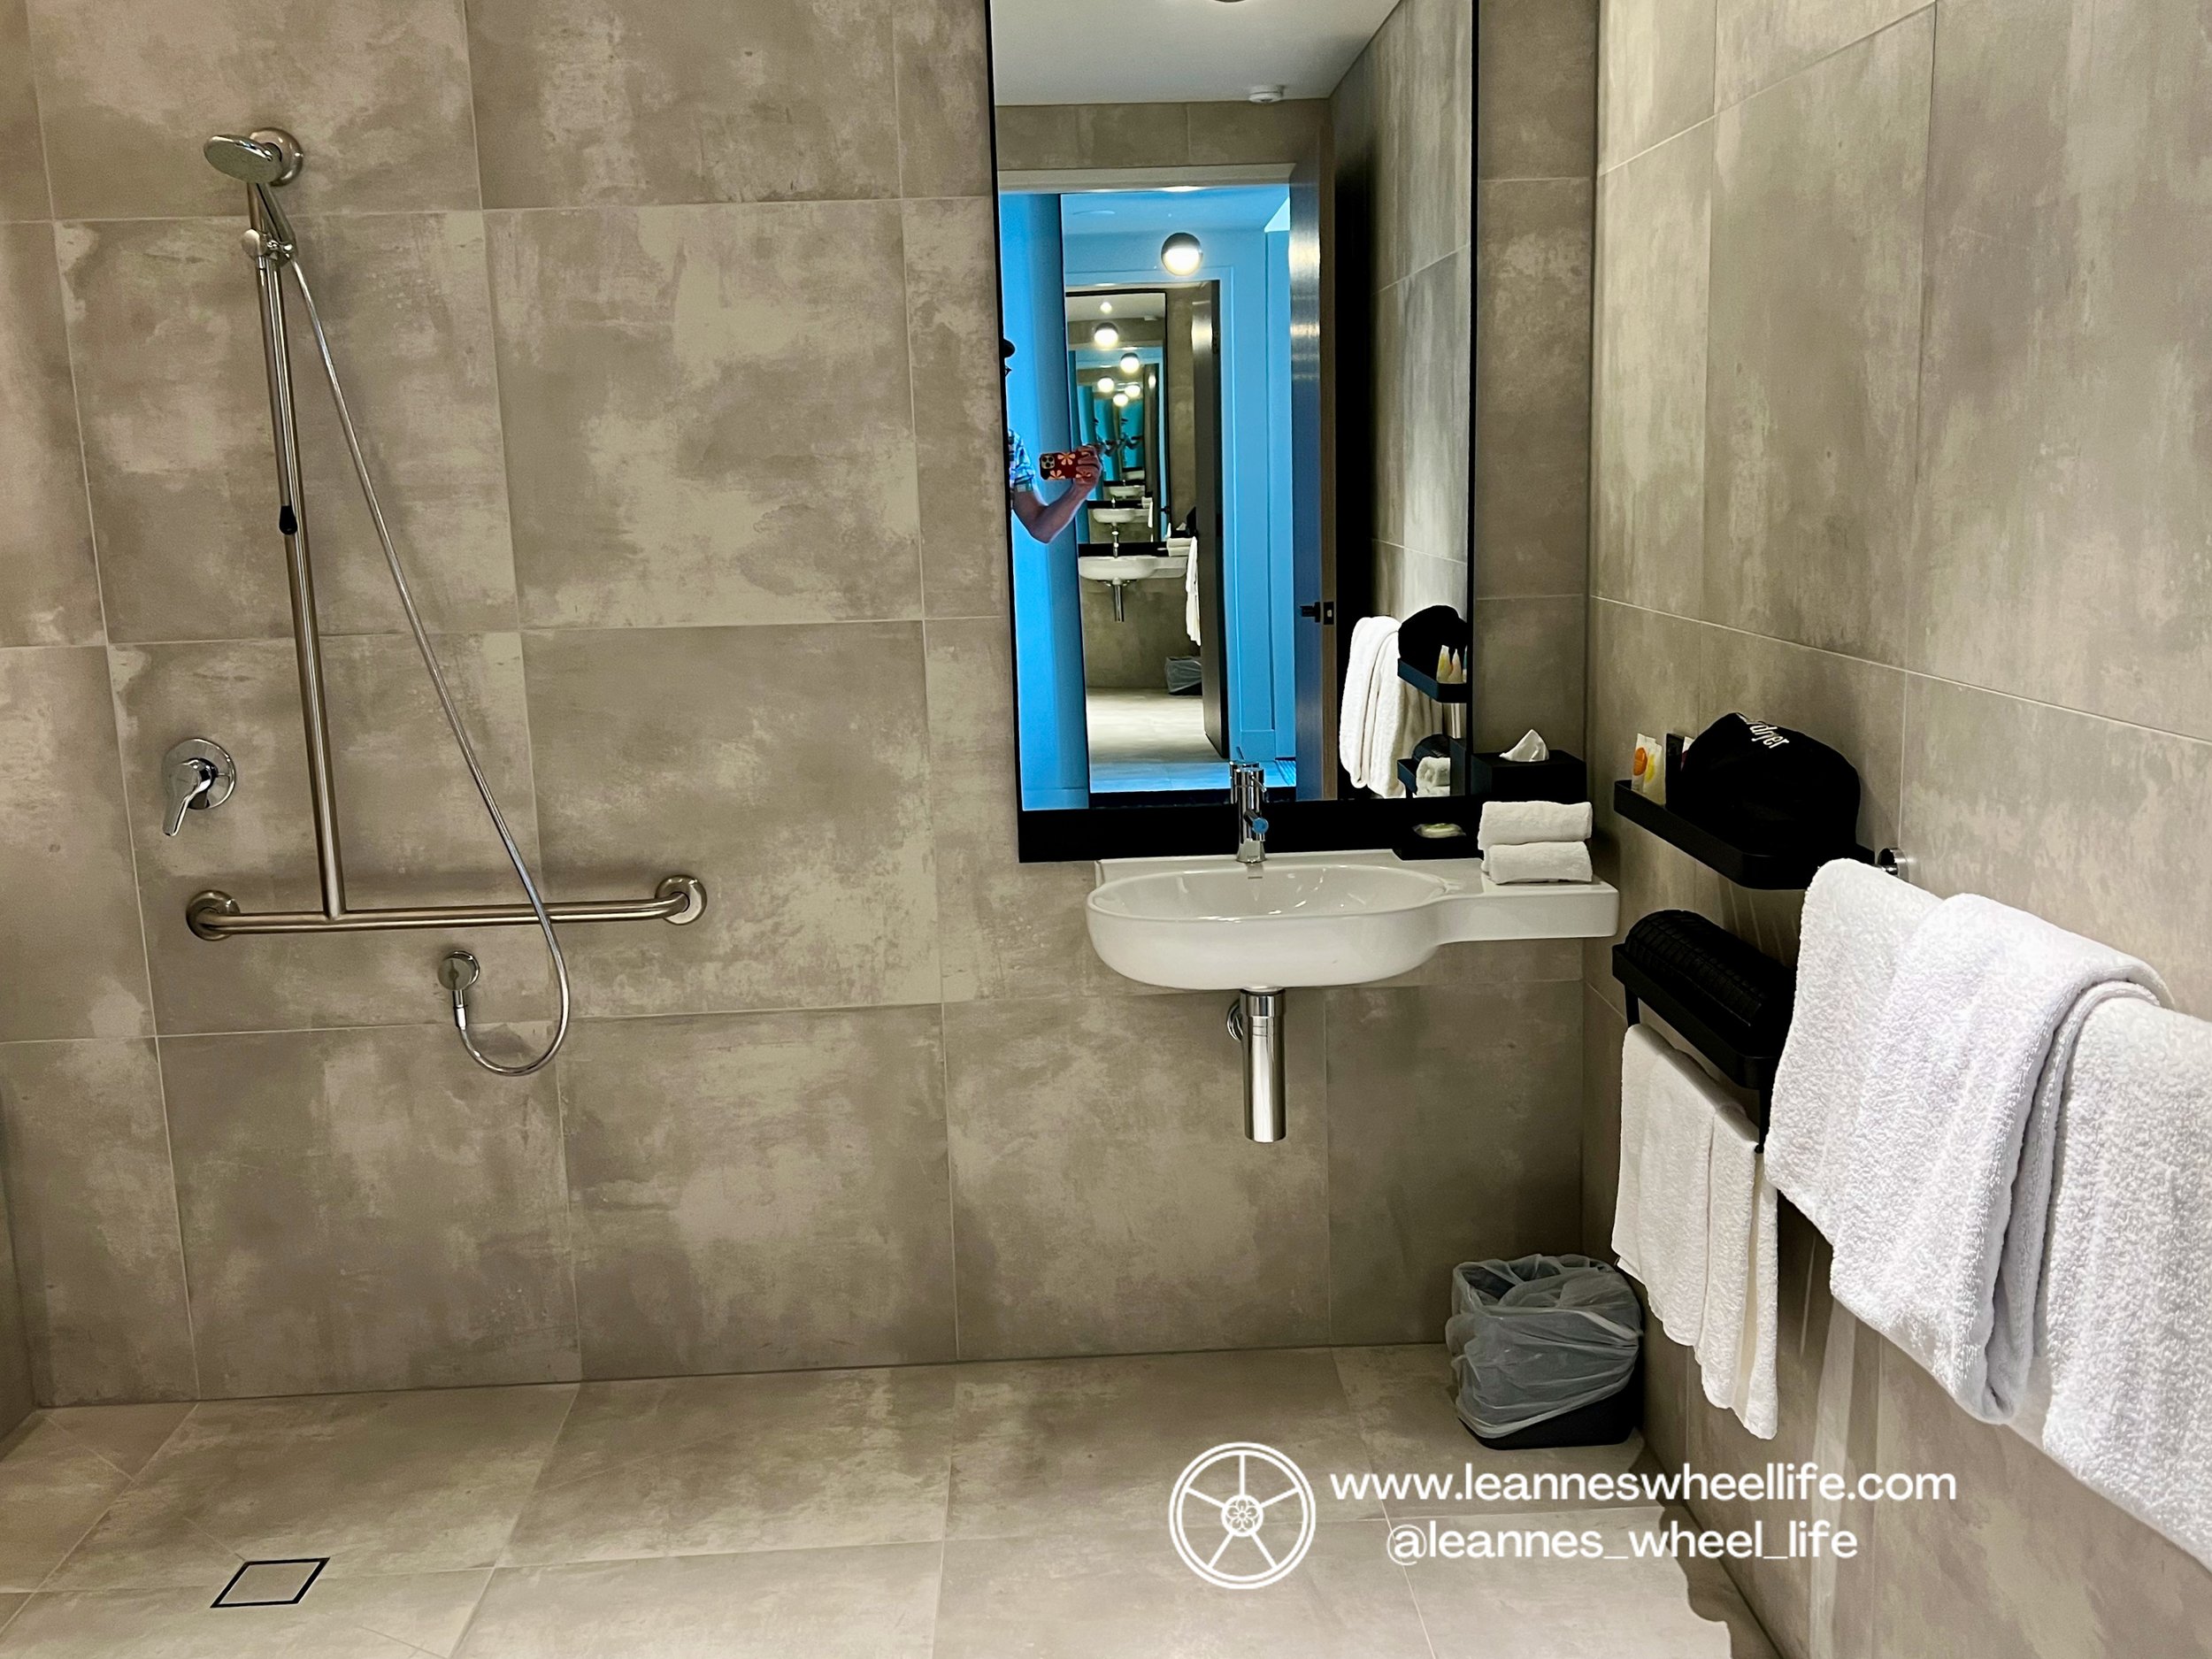  Hyatt Place Melbourne Caribbean Park fully wall and floor tiled smudged grey-white tile colour. Roll under sink with towel rails and open plan shower to left 